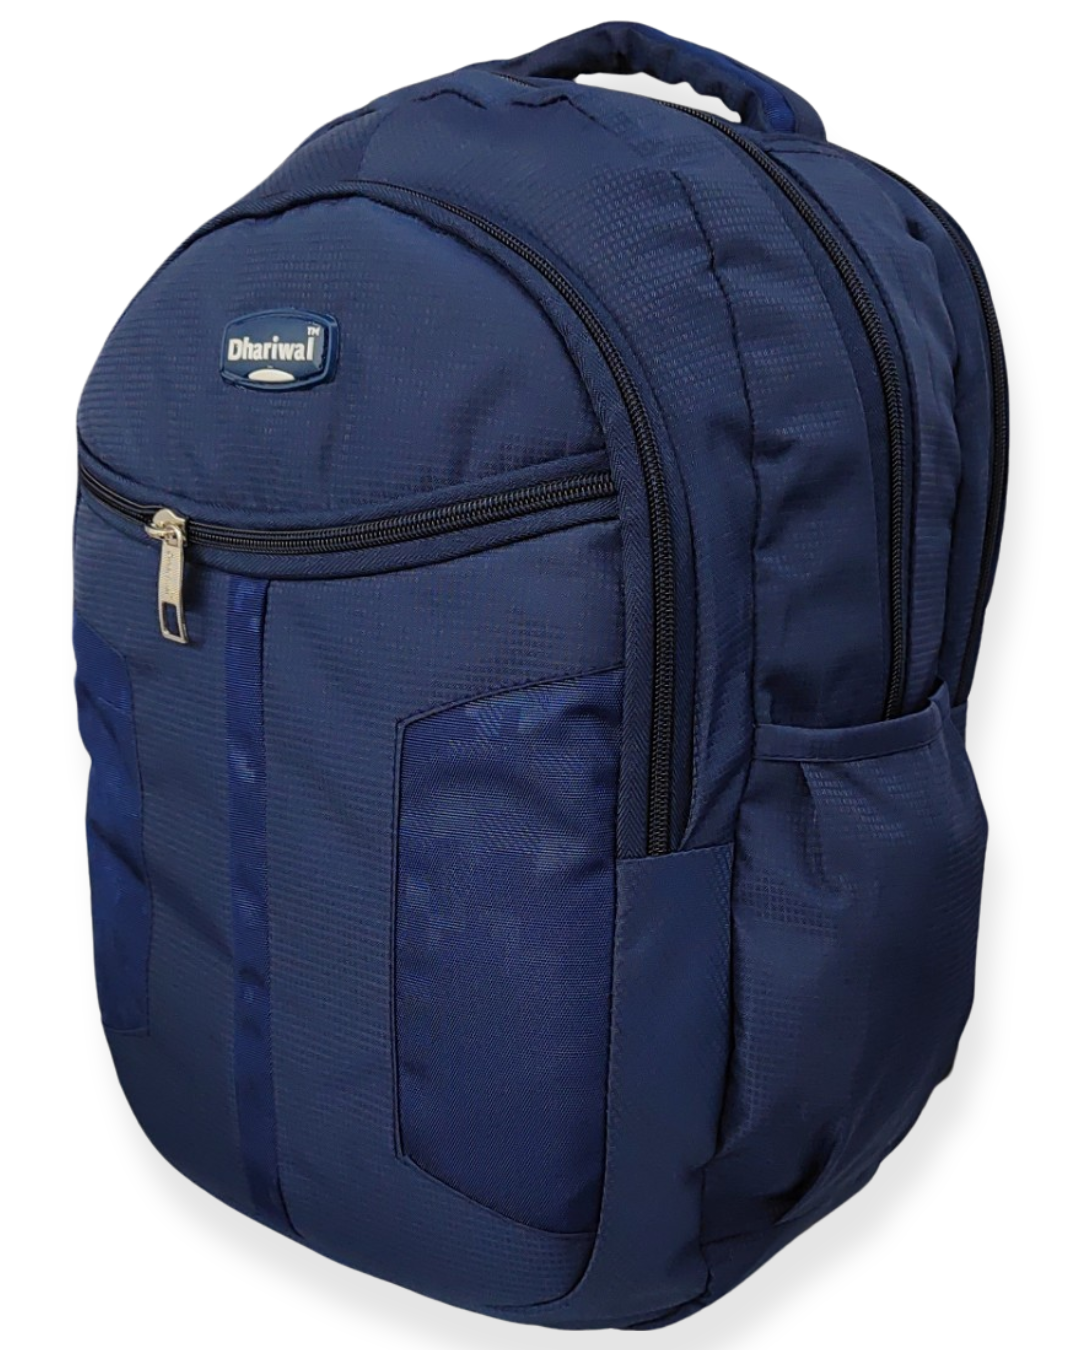 Dhariwal Unisex Dual Compartment Backpack 30L BP-224